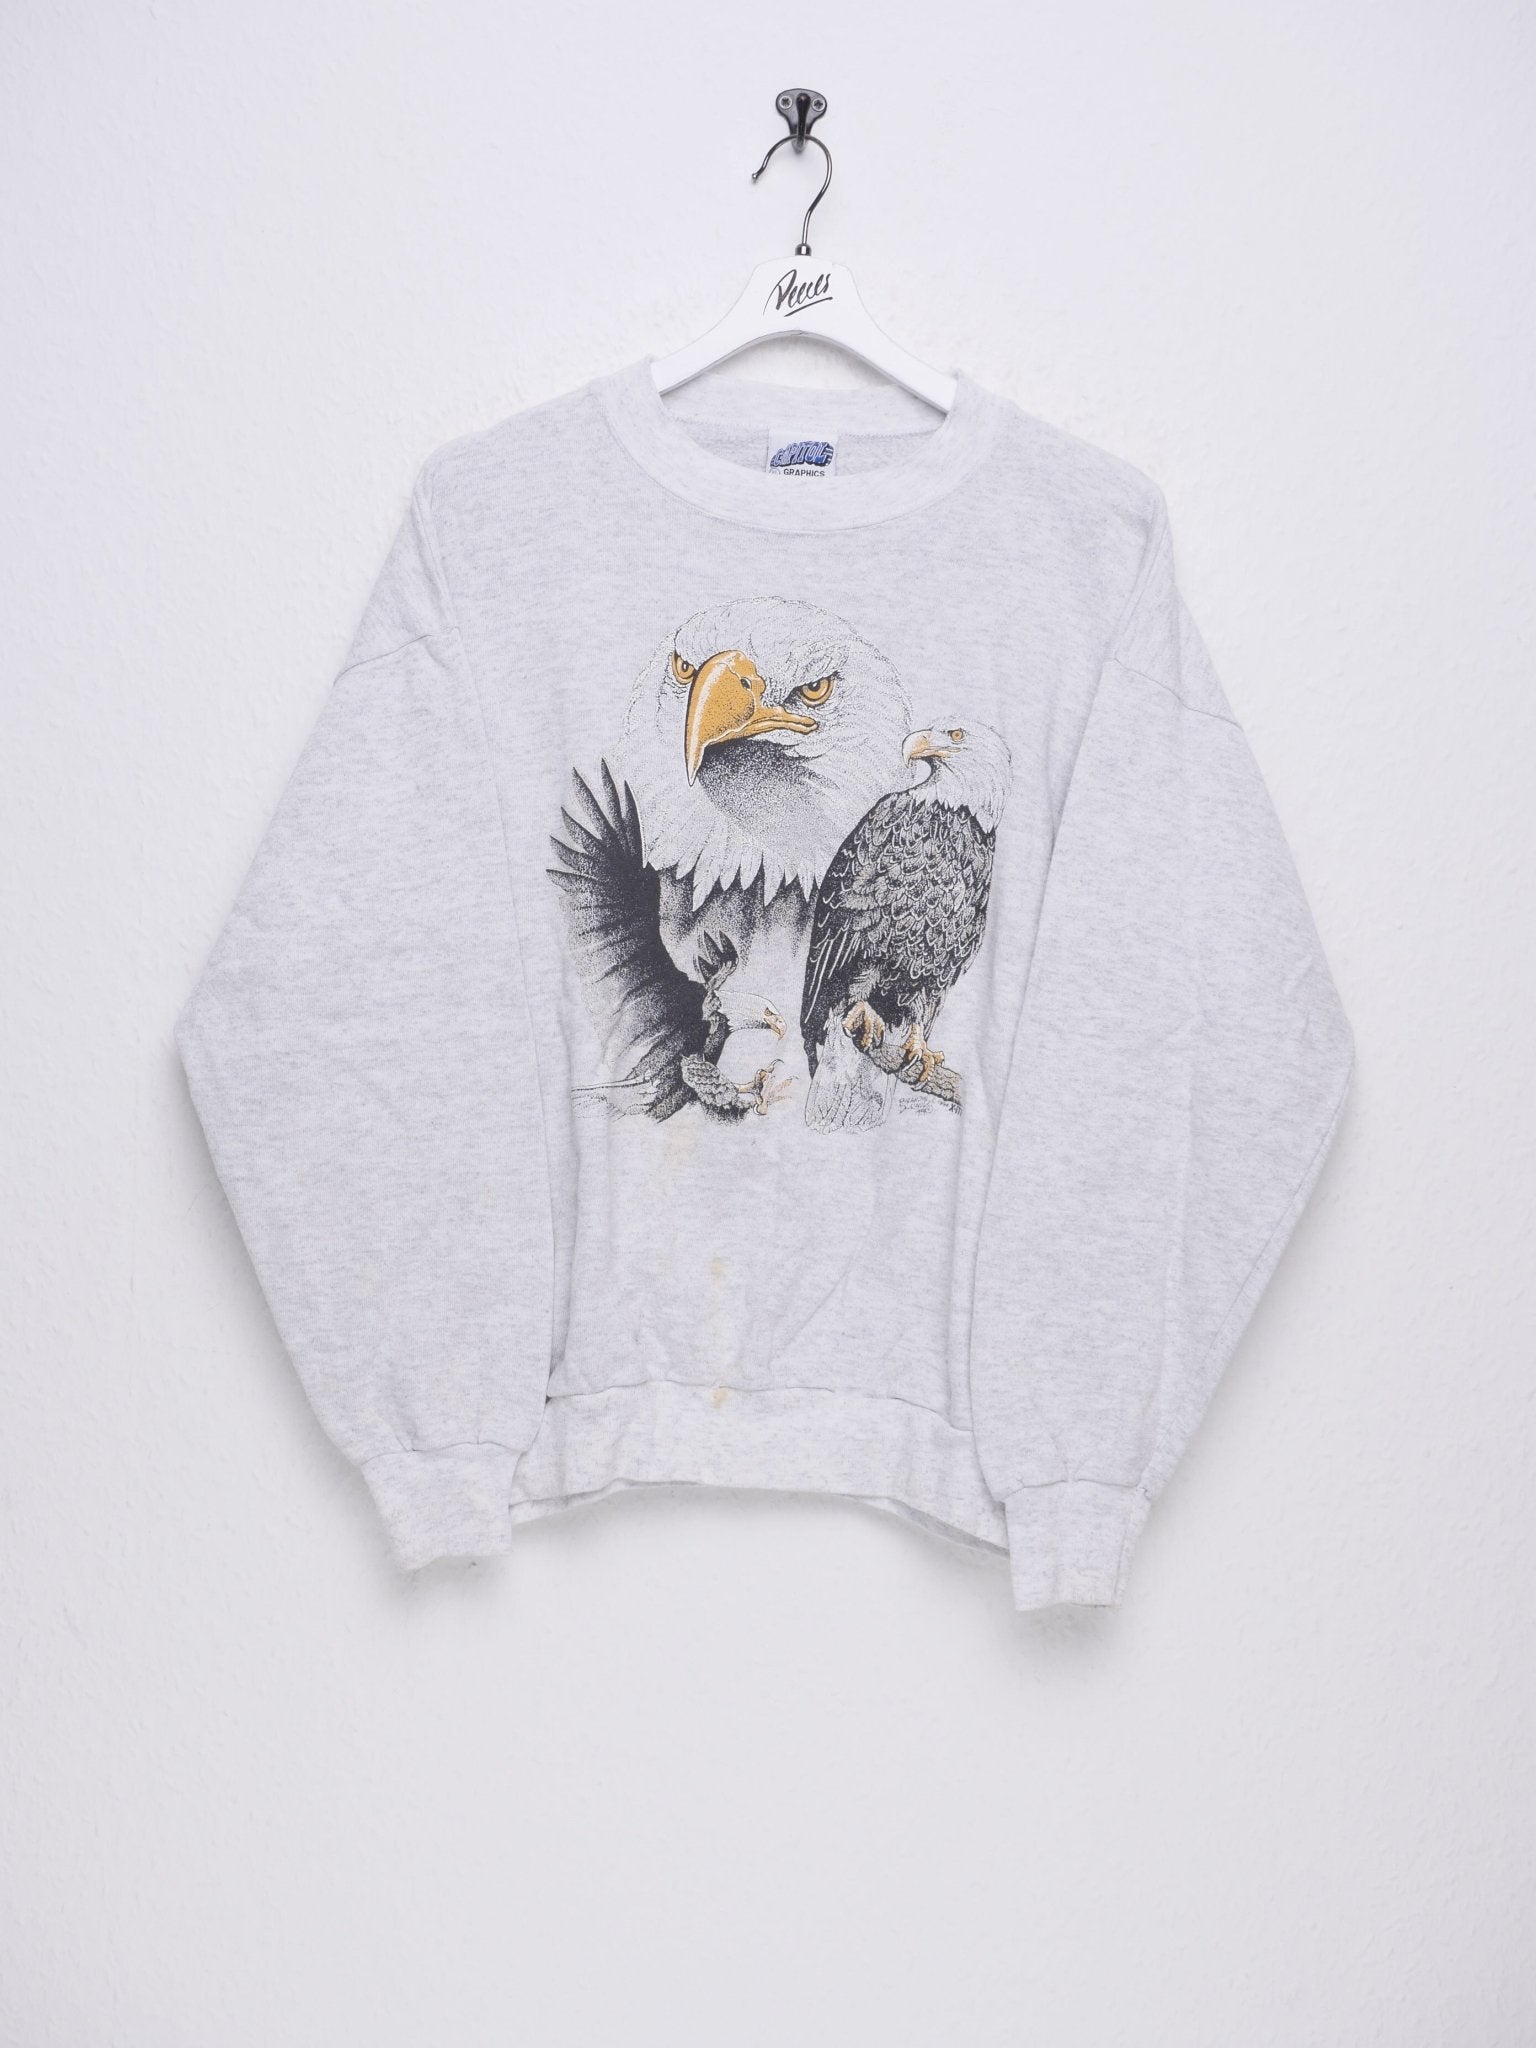 Bald Eagle printed Graphic 1991 Vintage Sweater - Peeces